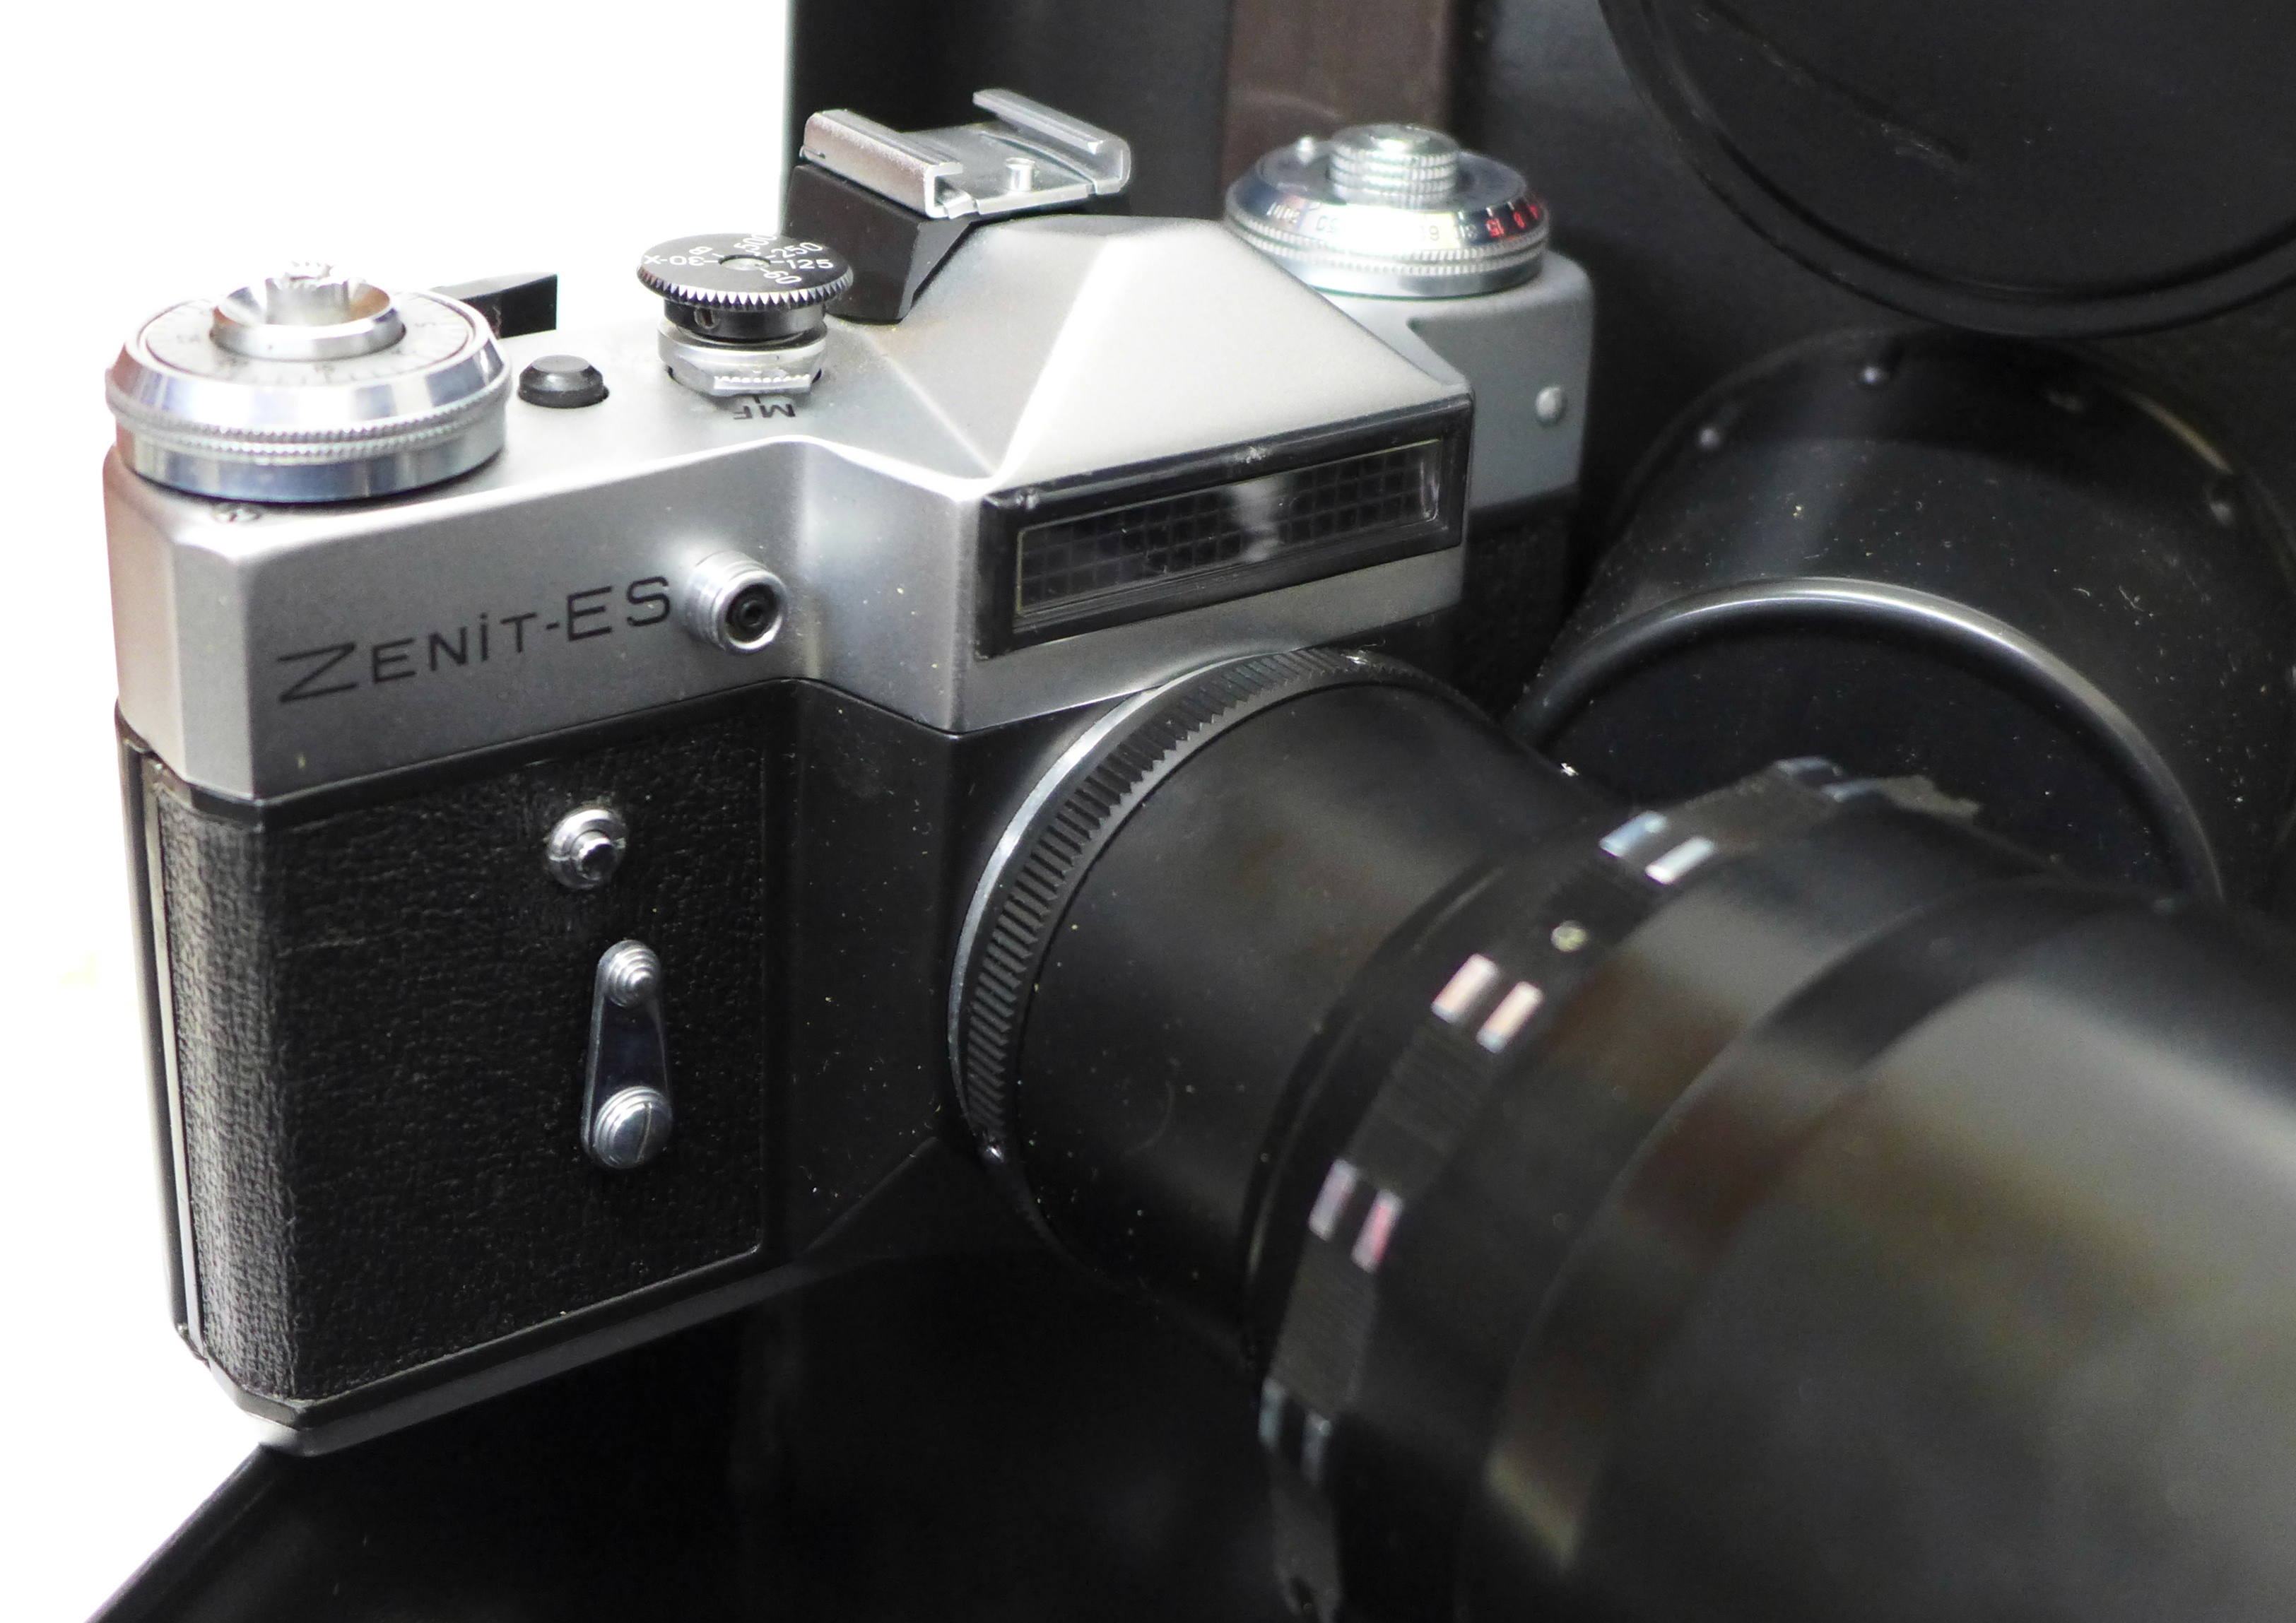 A Zenit-ES 35mm film camera with a USSR TAIR-3-PhS 4. - Image 2 of 6